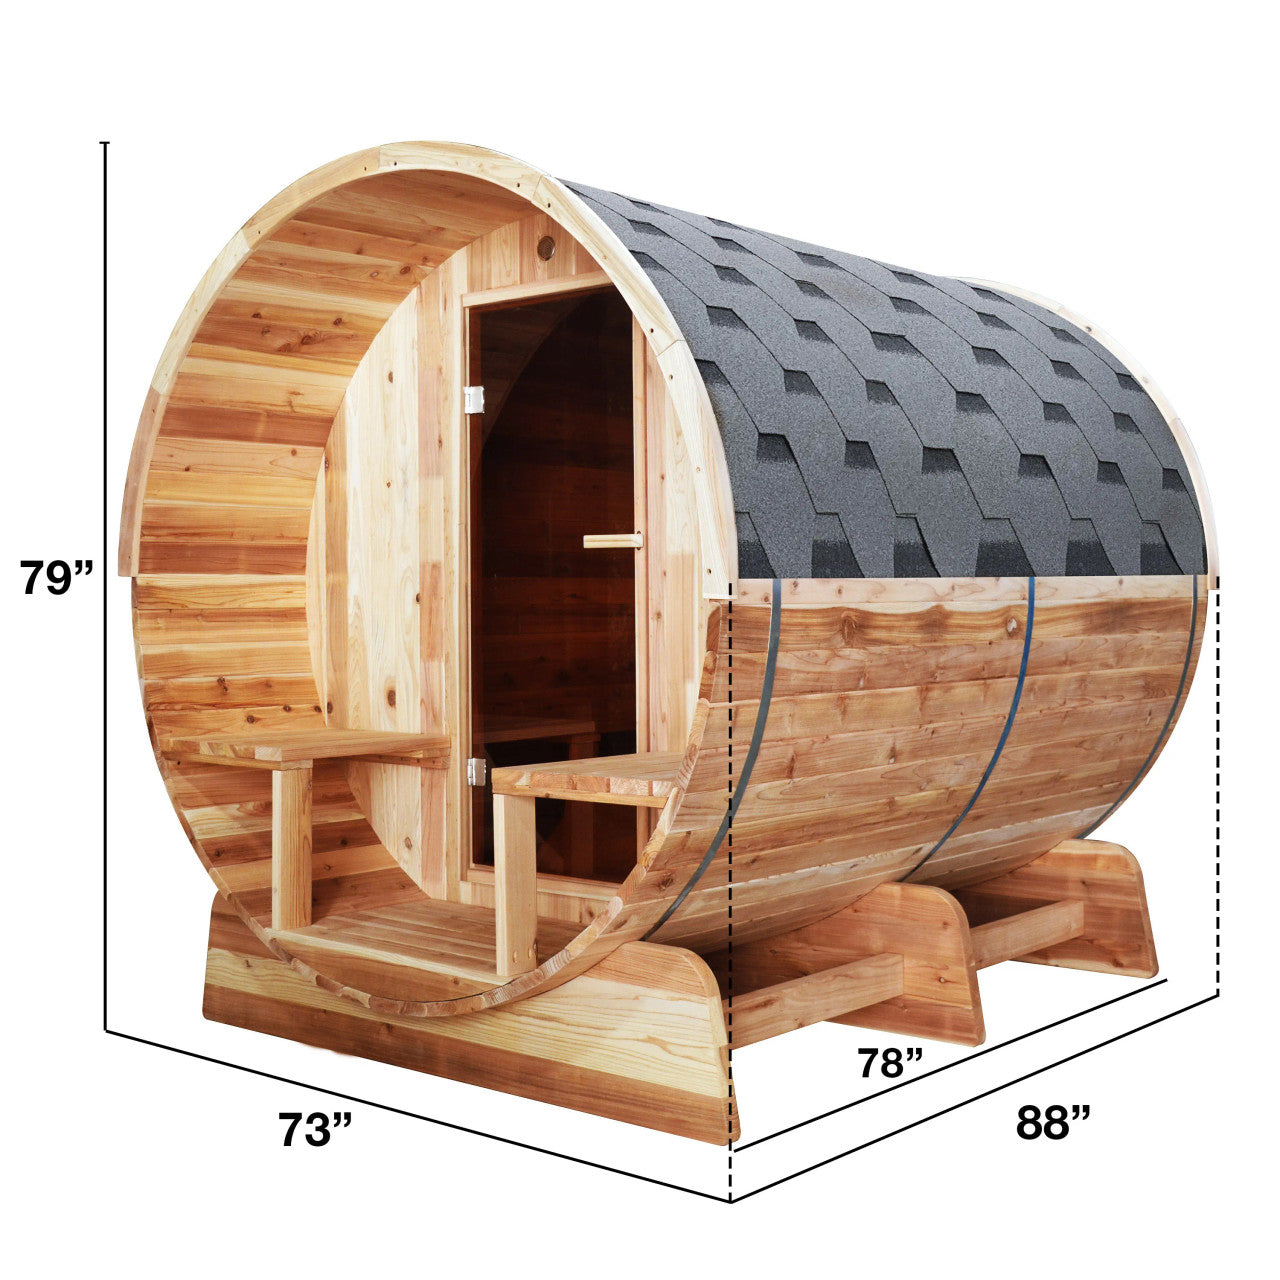 Aleko Outdoor/Indoor Red Cedar Wet/Dry Barrel Sauna - Front Porch Canopy with Panoramic View - Bitumen Shingle Roofing - 6-8 Person